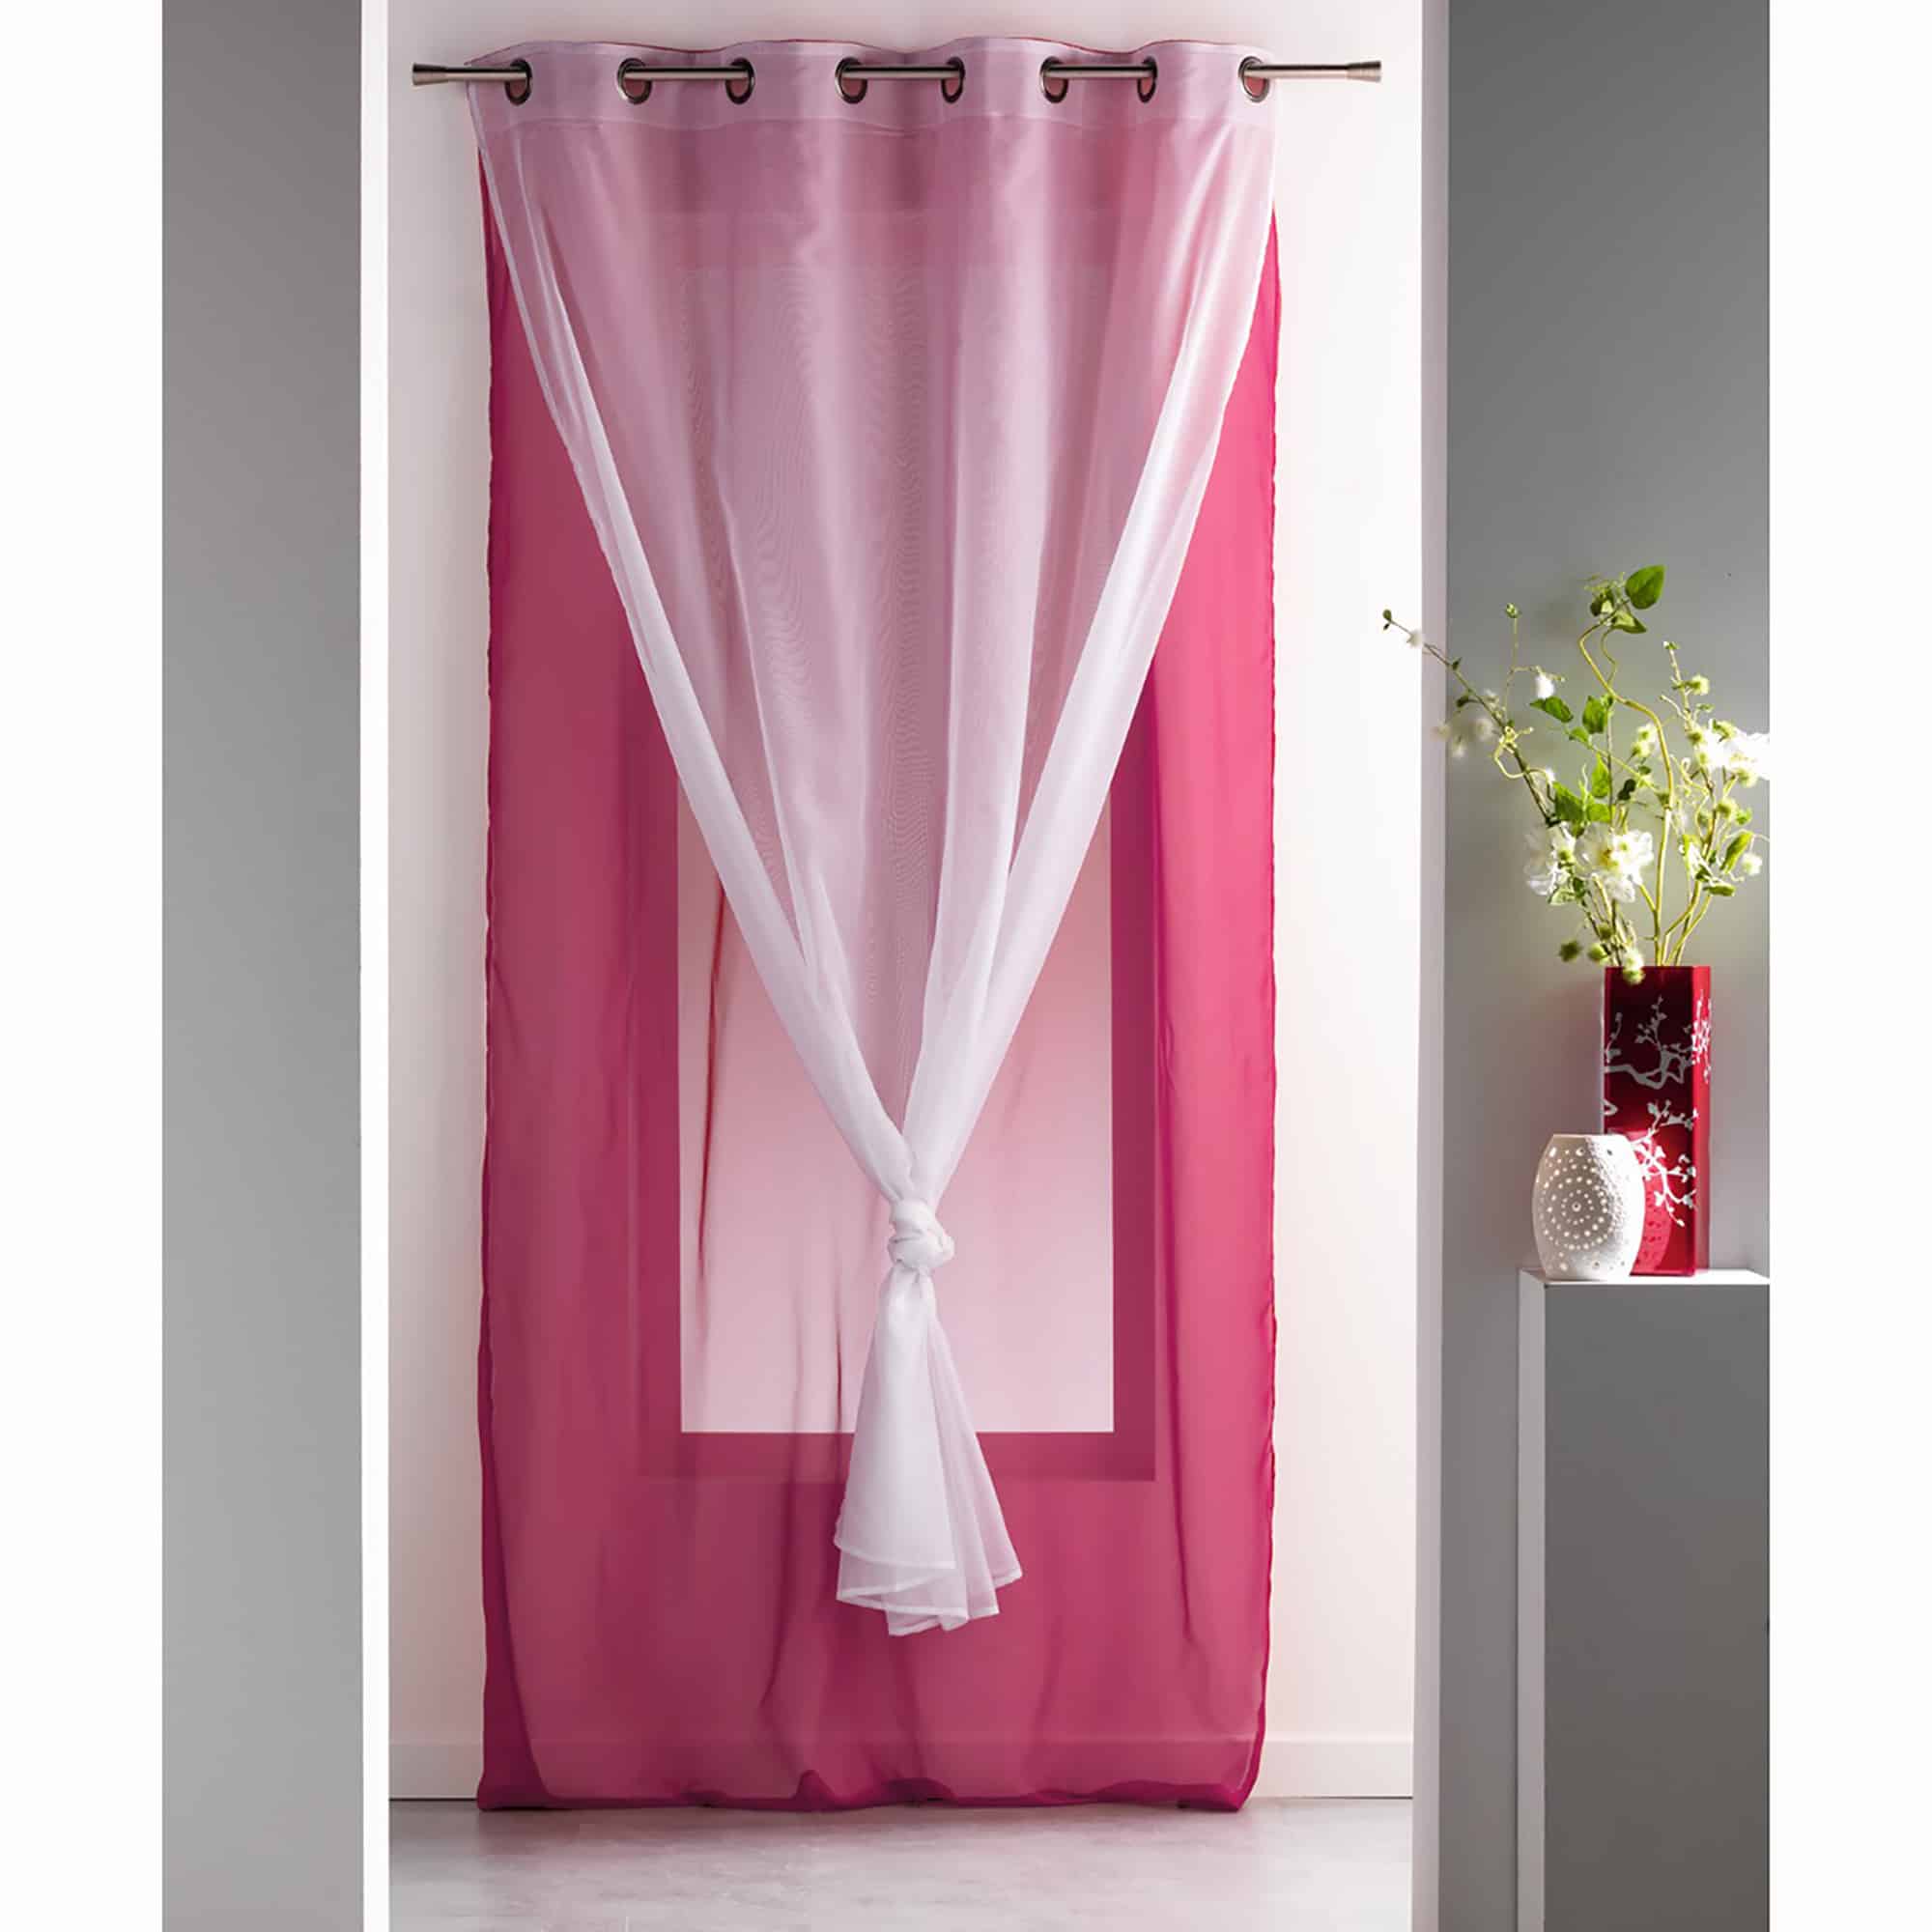 double sheer curtain solid 2 colors pink white 1 panel for large window